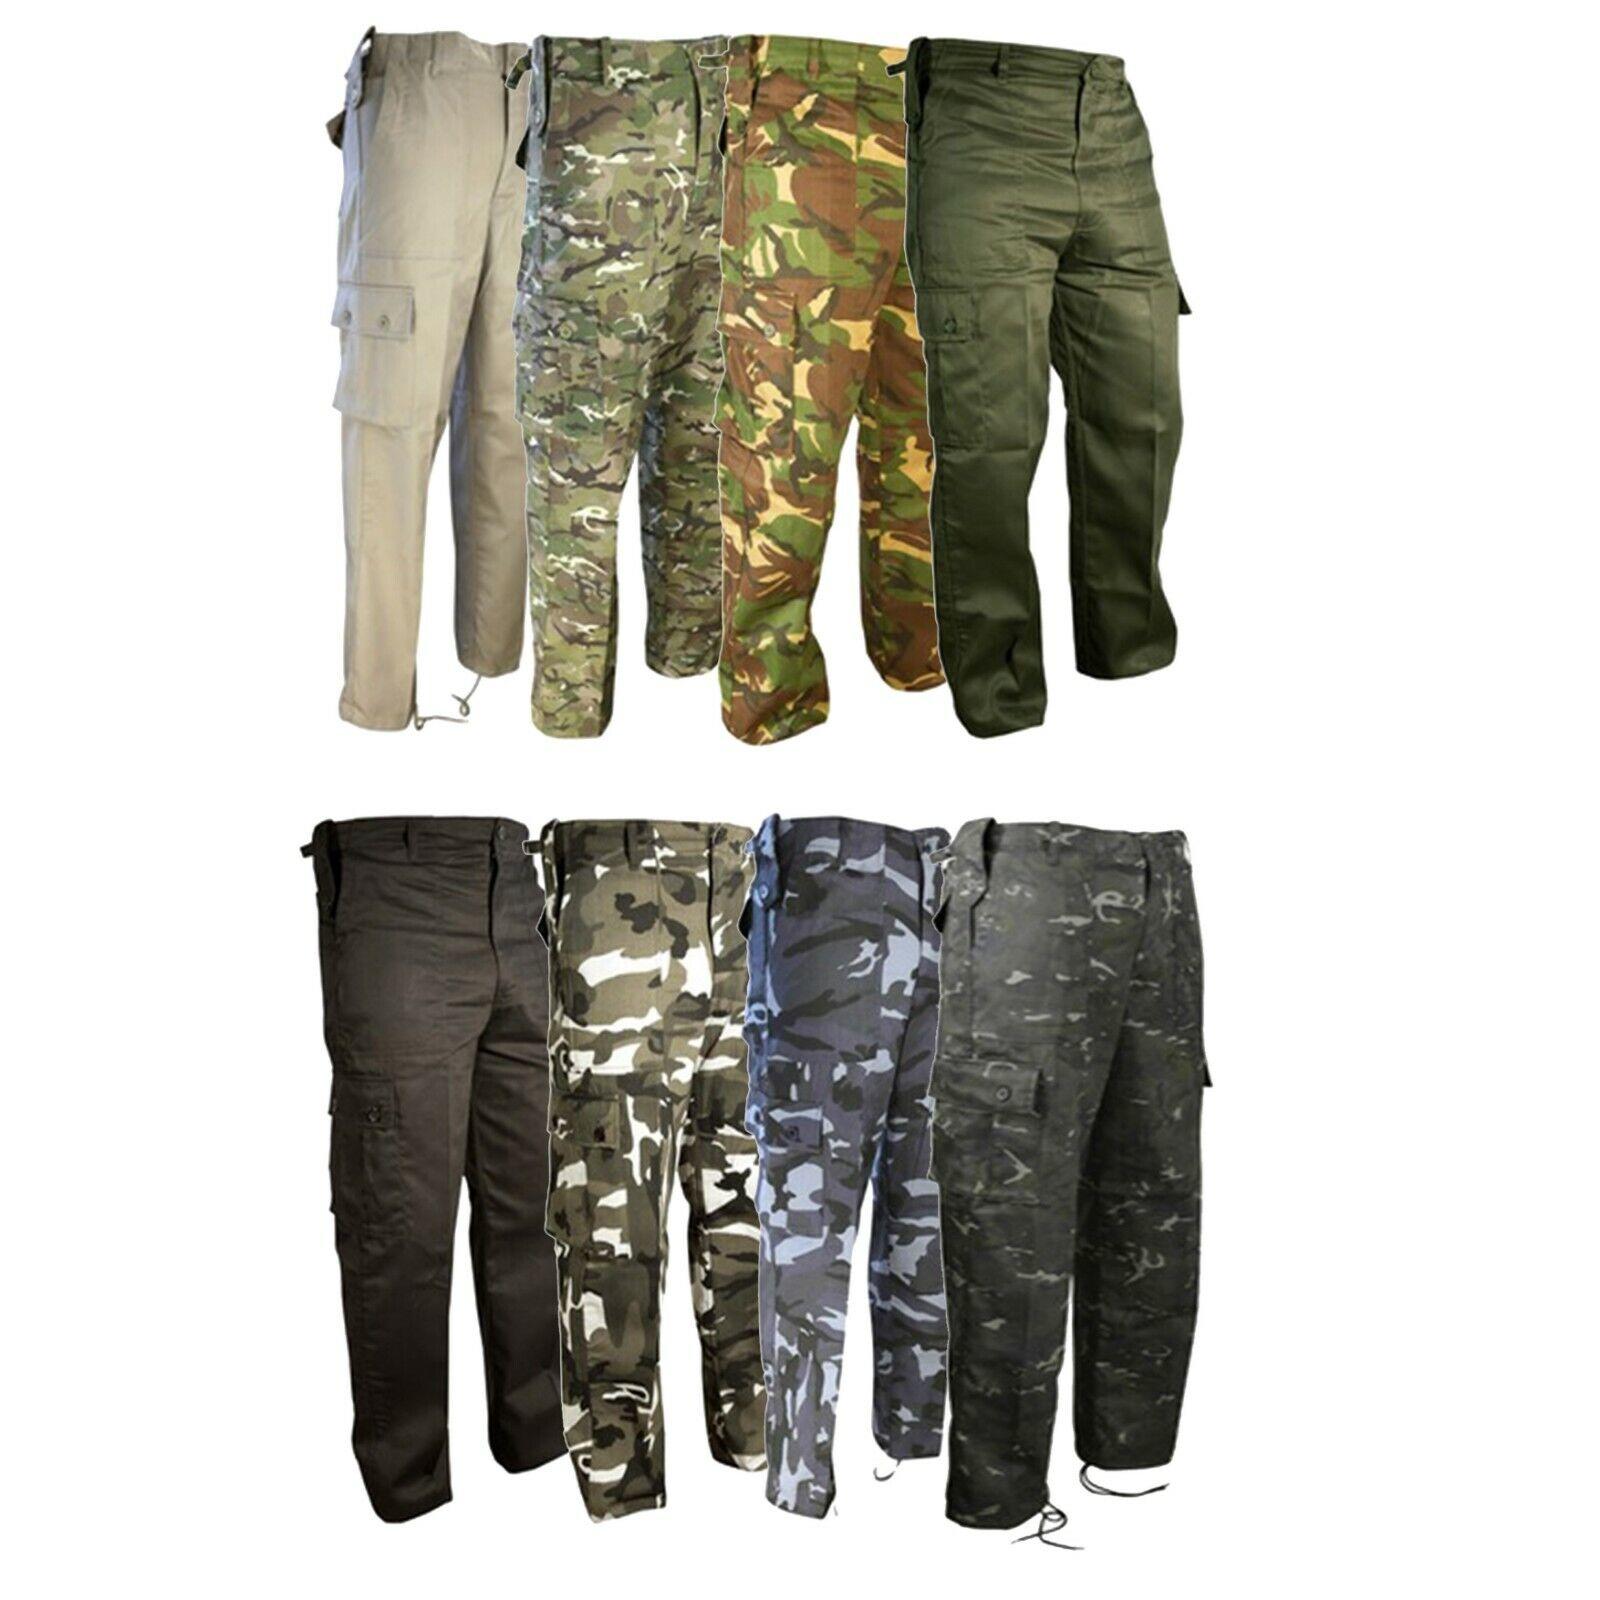 Outdoor Men Cargo Combat Pants Tapered Joggers Sports Work Trousers Pockets  | eBay